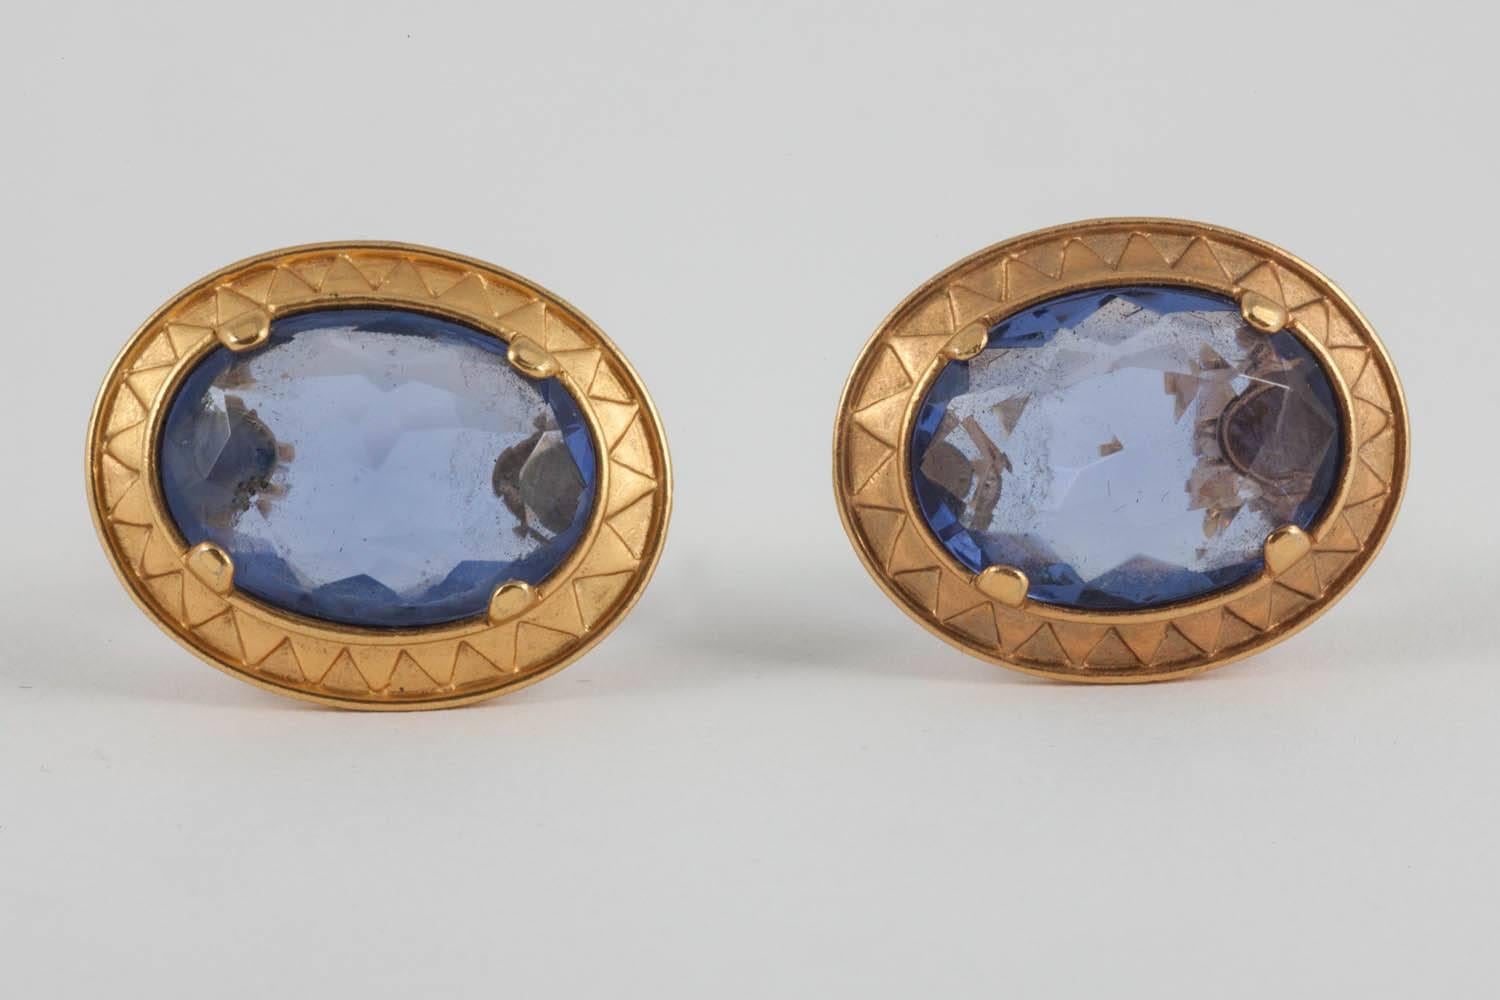 In a warm soft high karat colour gilding, these lovely Yves Saint Laurent earrings will work for day and night. 
The big clear blue central 'stone' is faceted for maximum sparkle.
Yves Saint Laurent was born in 1936, and became one of the 20th